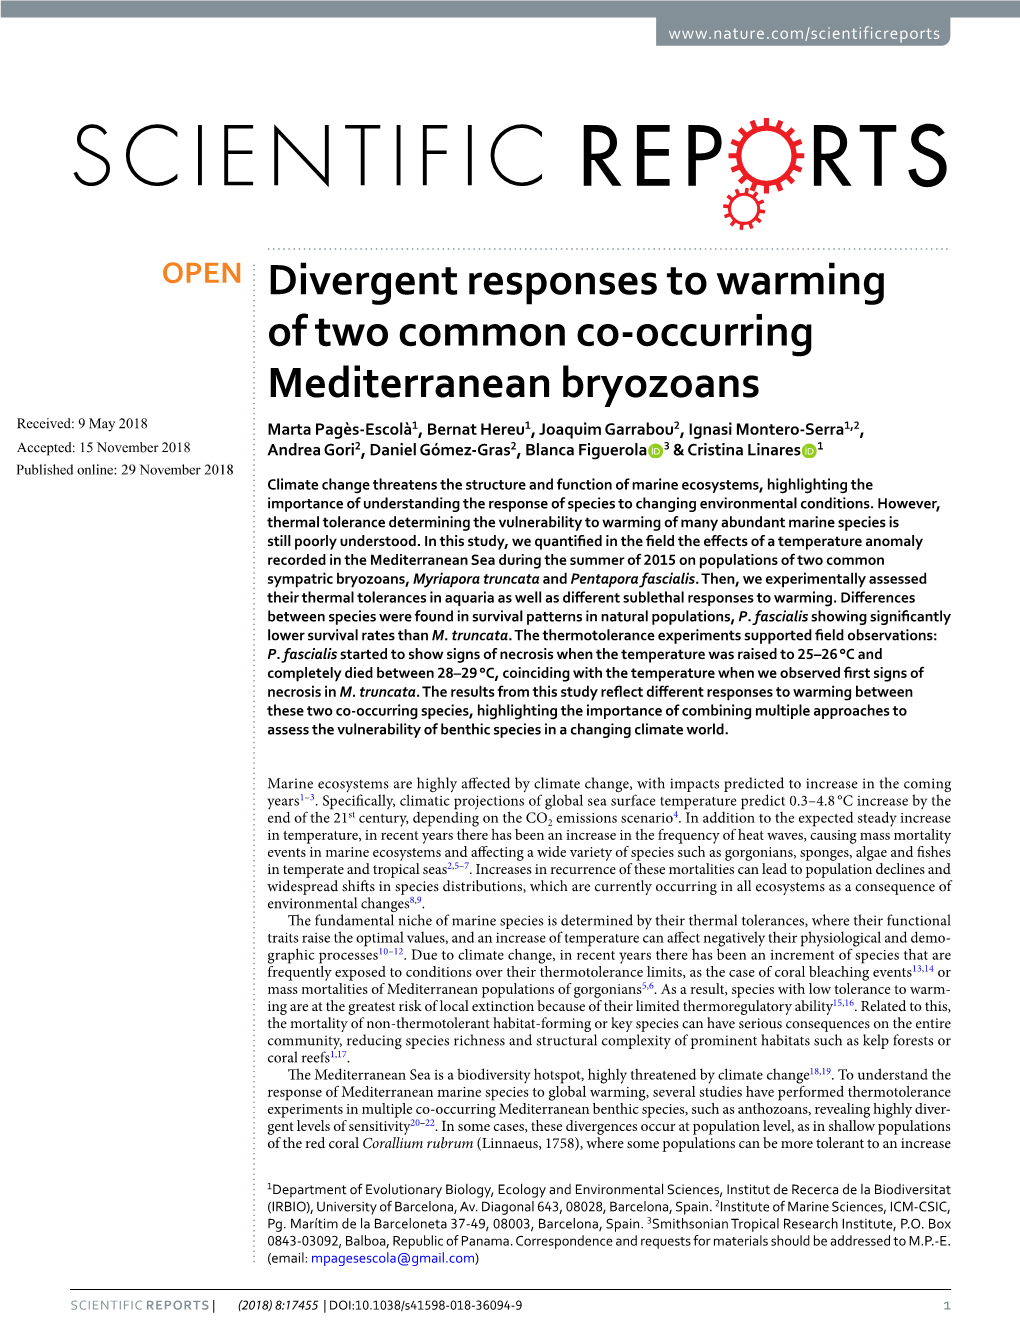 Divergent Responses to Warming of Two Common Co-Occurring